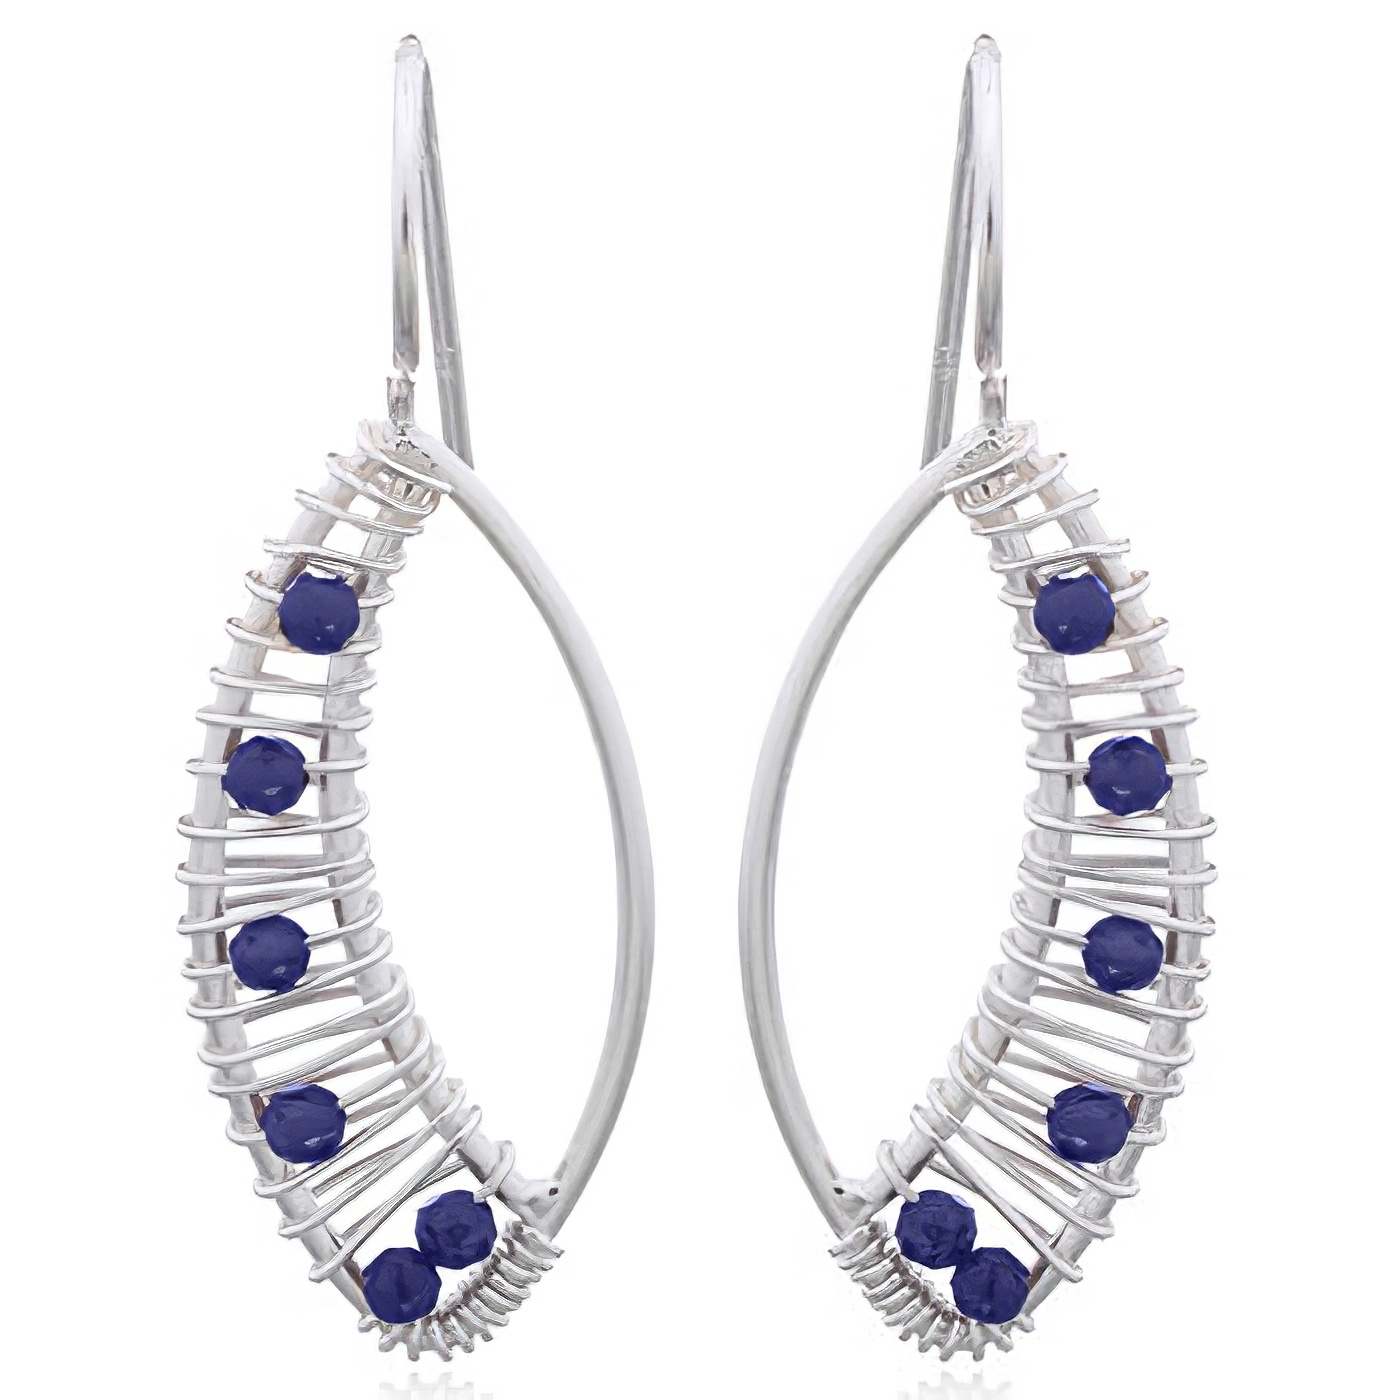 Embellished Marquise 925 Silver With Lapis Lazuli Drop Earrings by BeYindi 